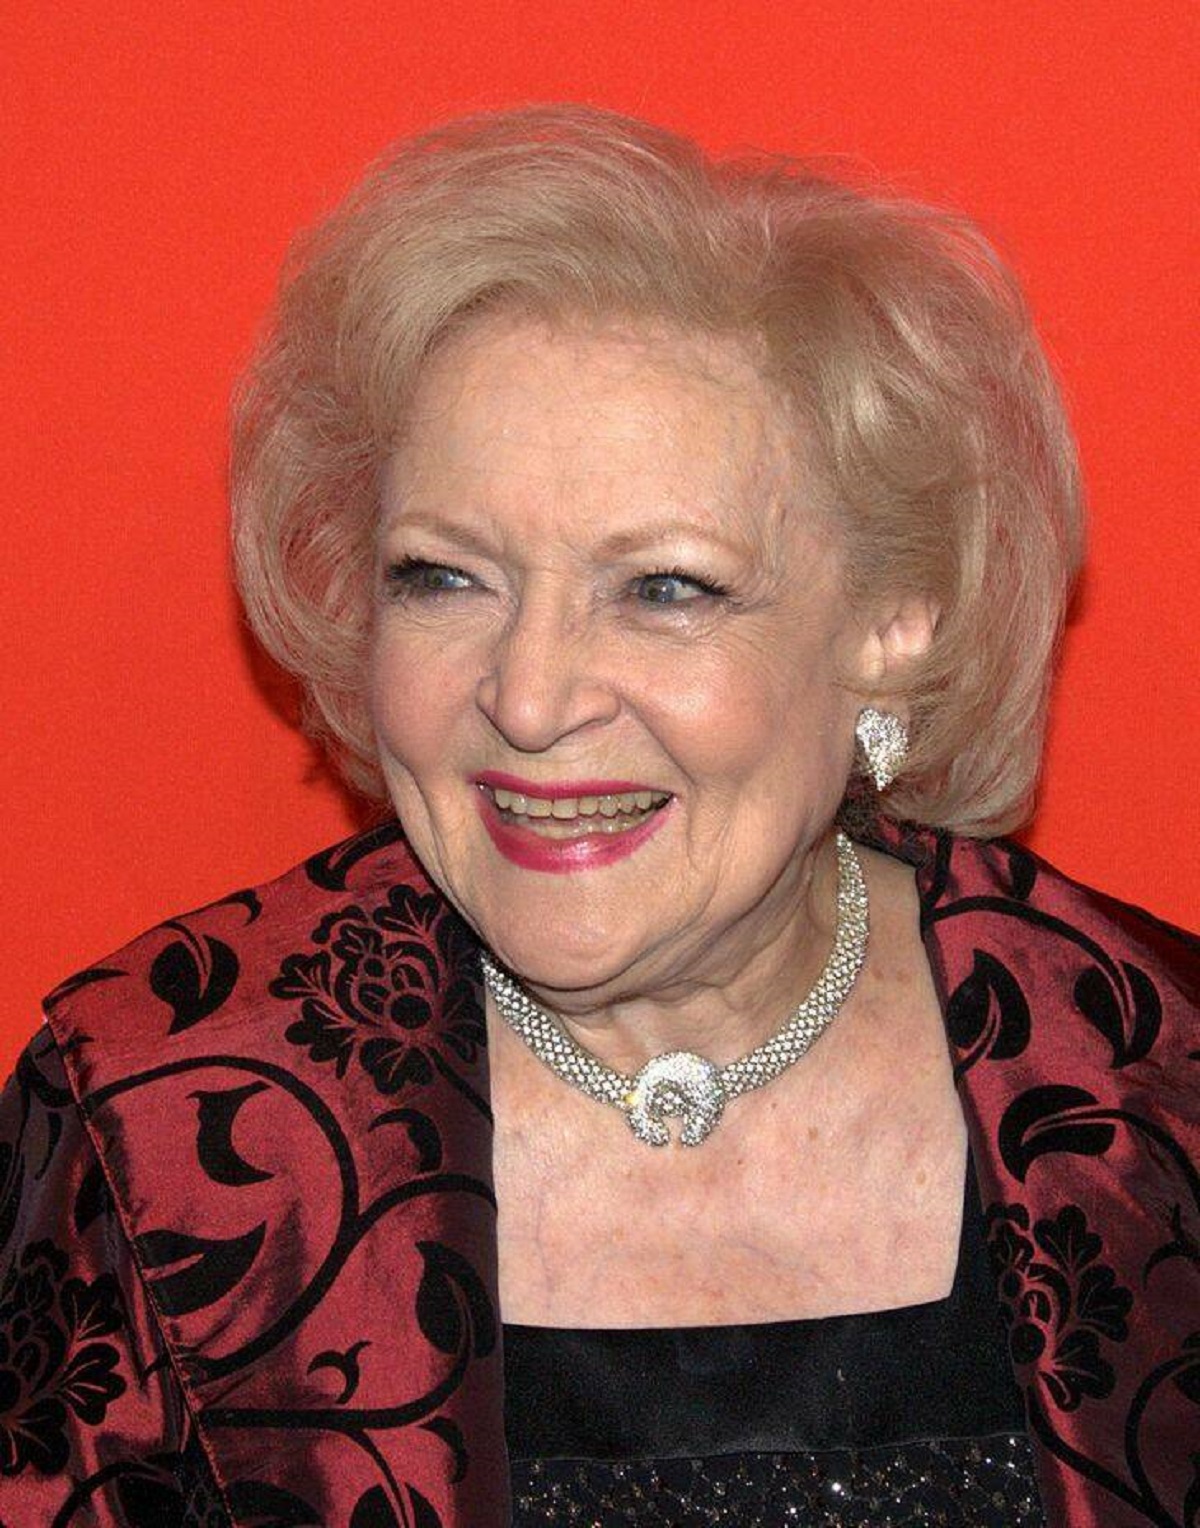 "The legendary Betty White was older than sliced bread. Yep, she outlived one of the greatest things since, well, sliced bread!"